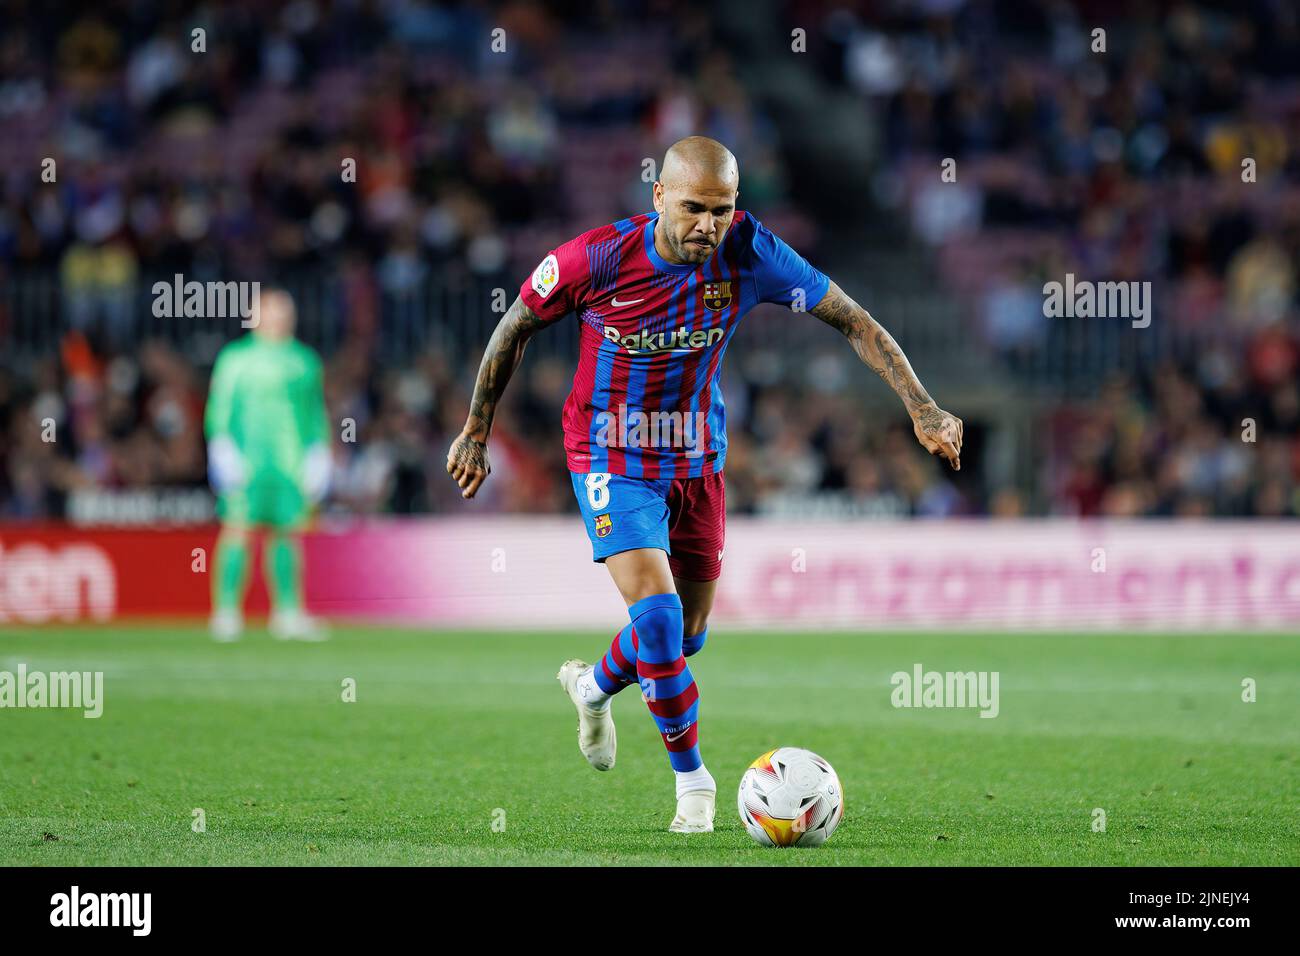 BARCELONA - MAY 1: Dani Alves in action during the La Liga match between FC Barcelona and RCD Mallorca at the Camp Nou Stadium on May 1, 2022 in Barce Stock Photo